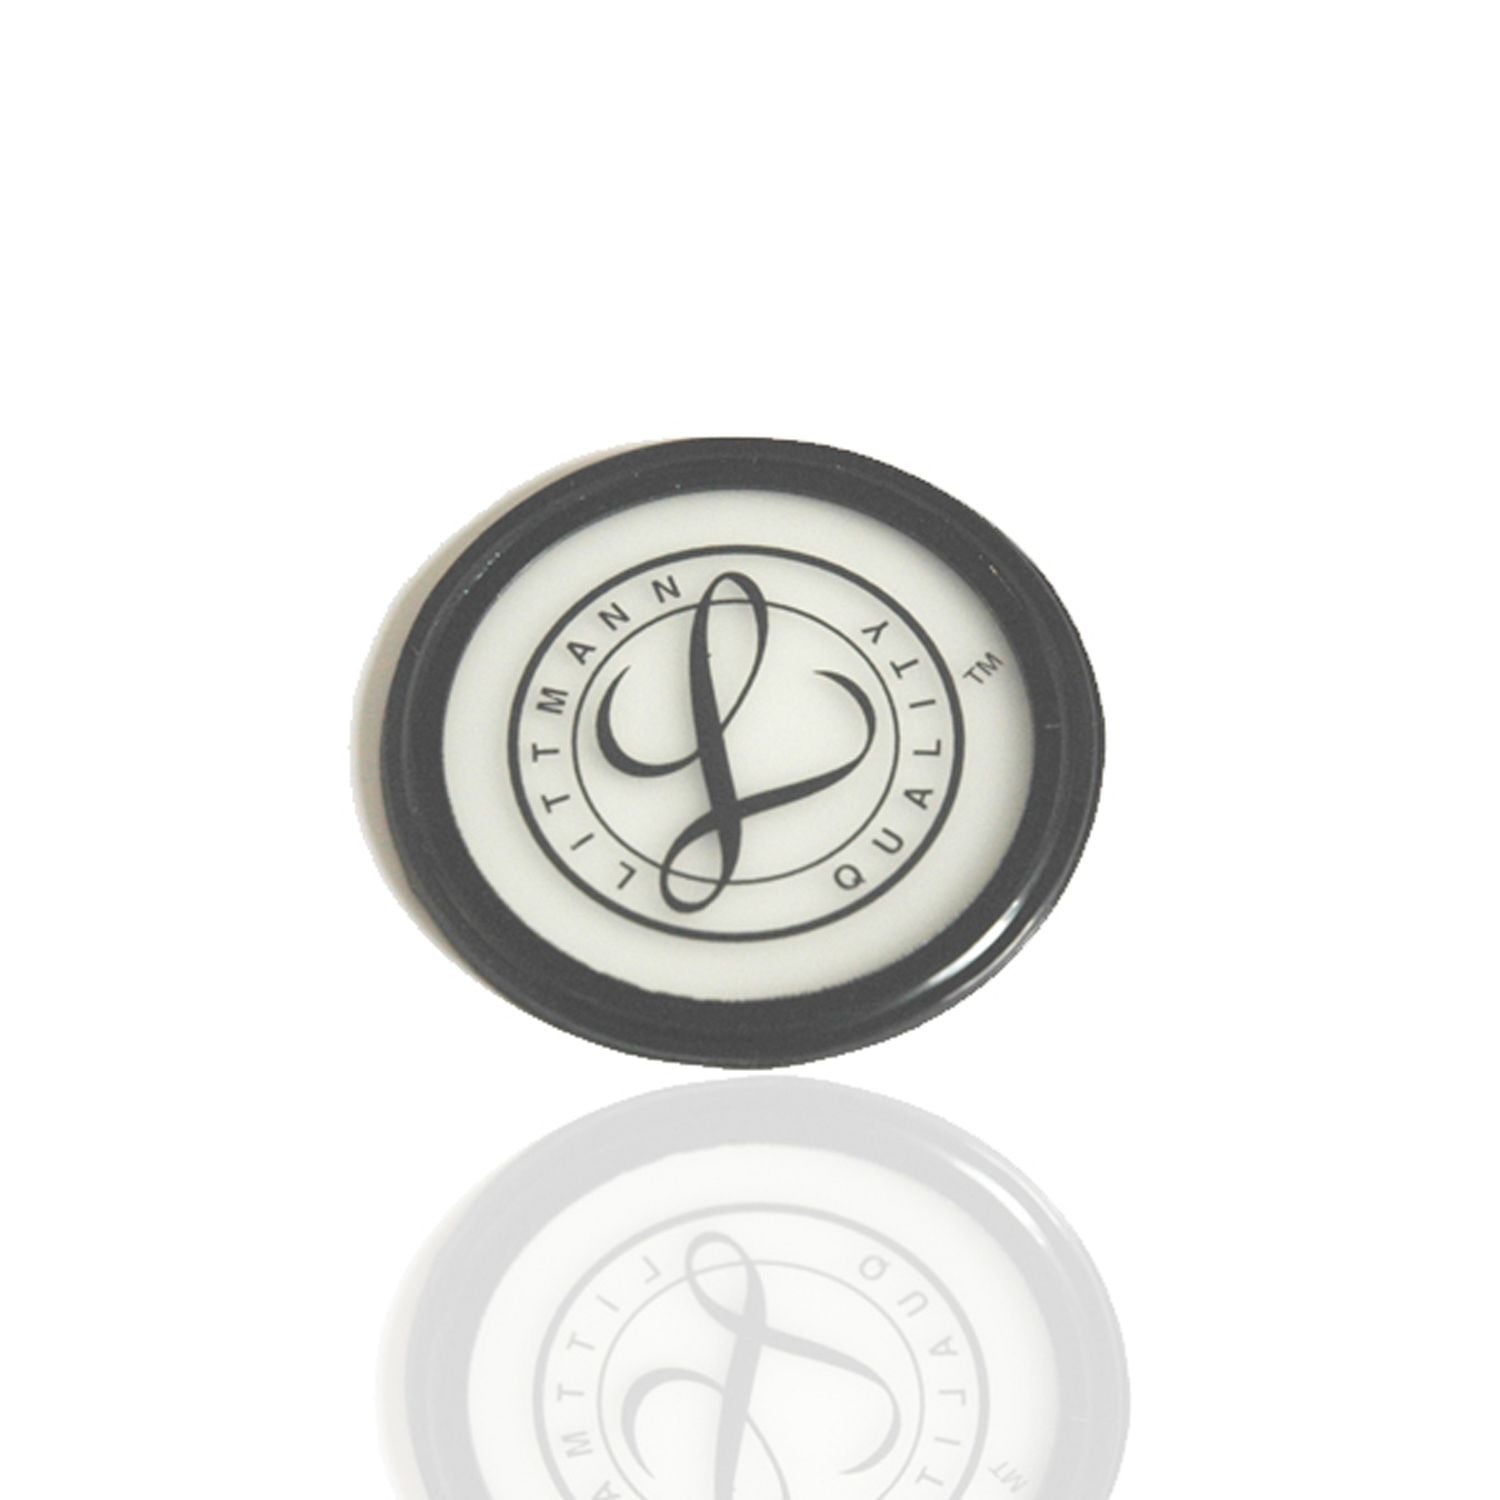 Tuneable Diaphragm & Rim Assembly for Cardiology III Paediatric Side (Single Piece)